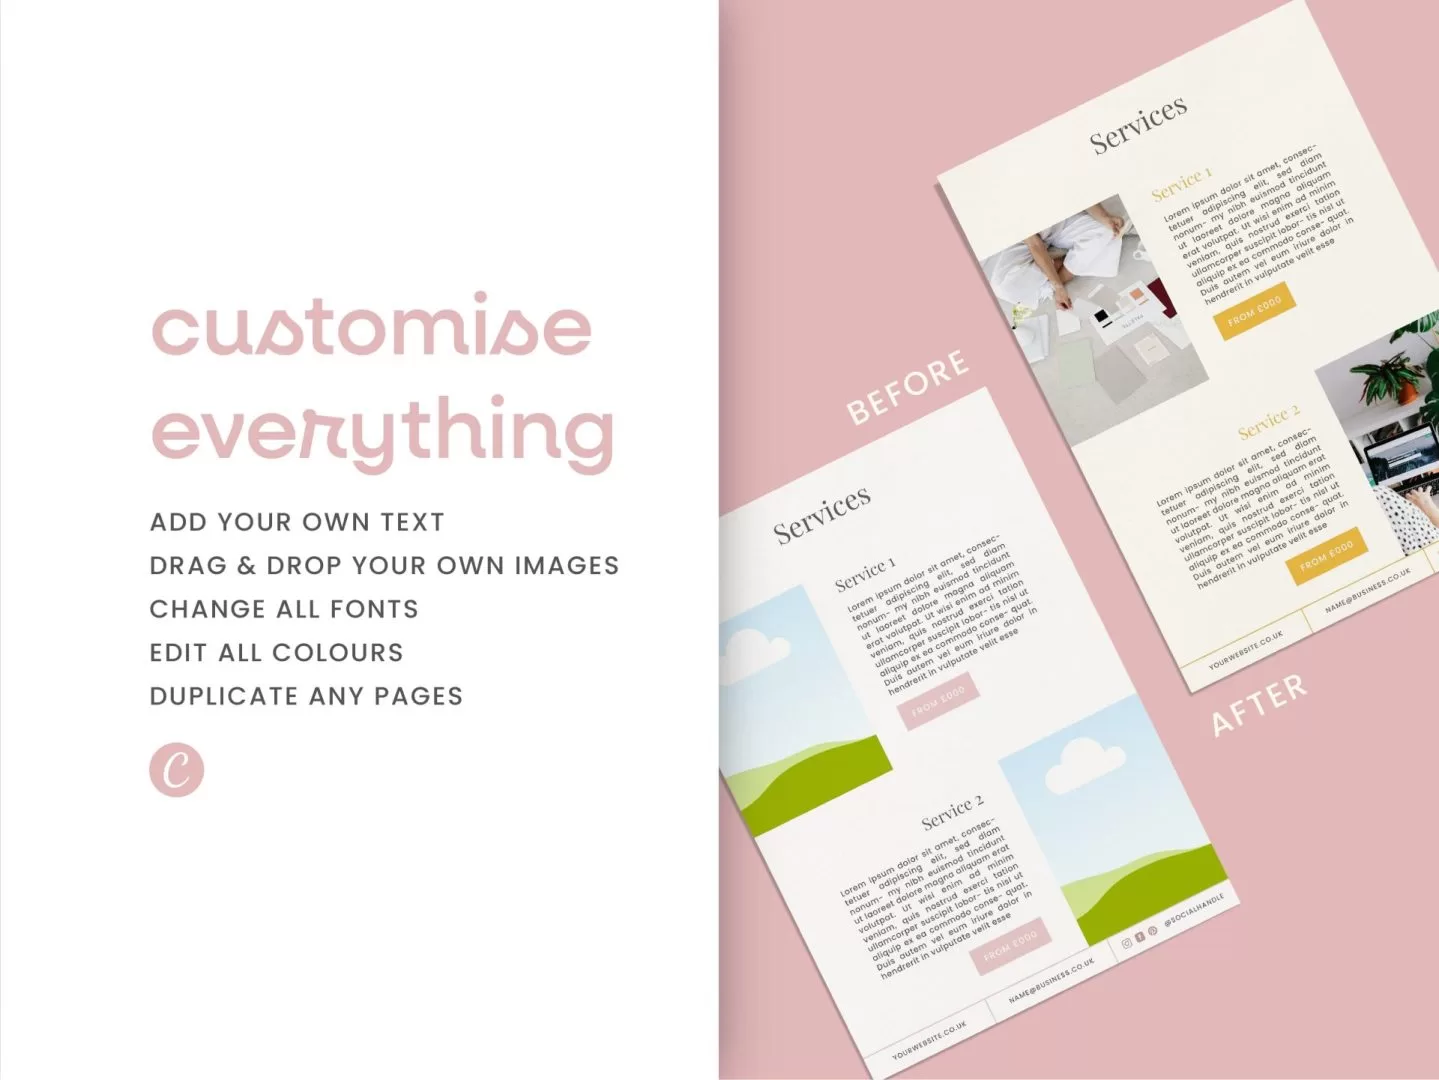 Service & Pricing Guide Canva Template